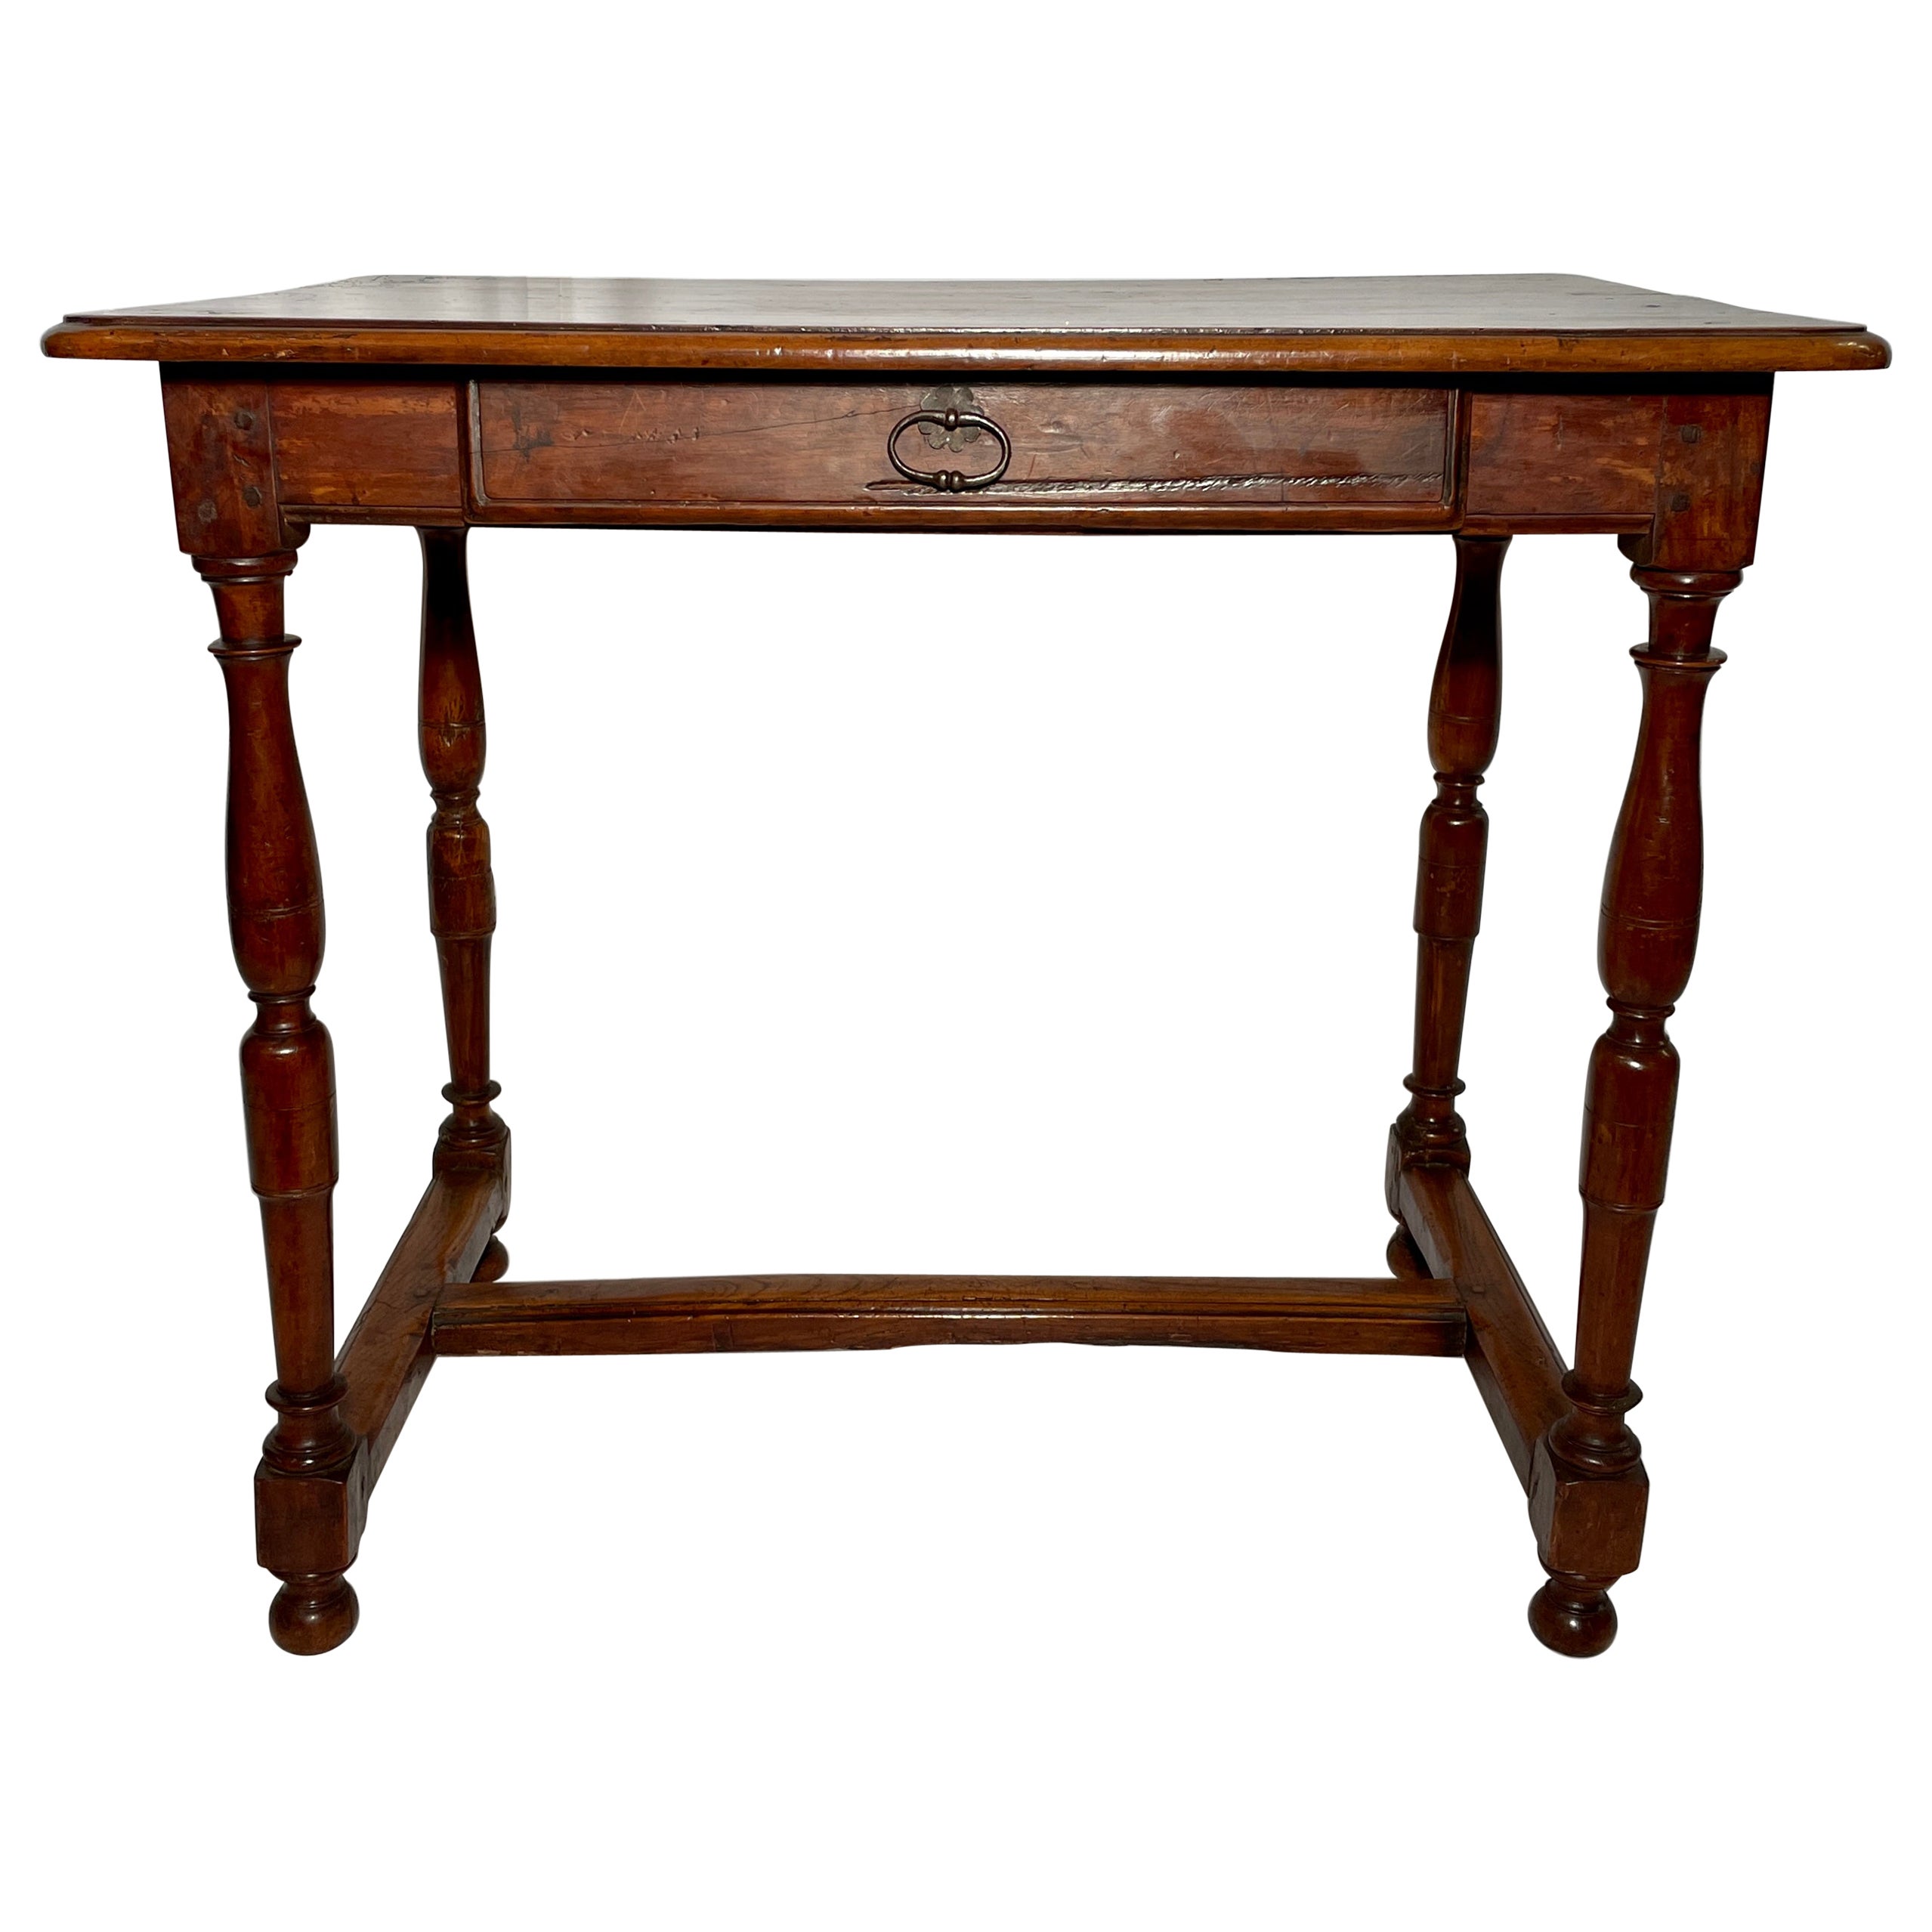 Antique French Country Walnut Table, circa 1890s-1900s